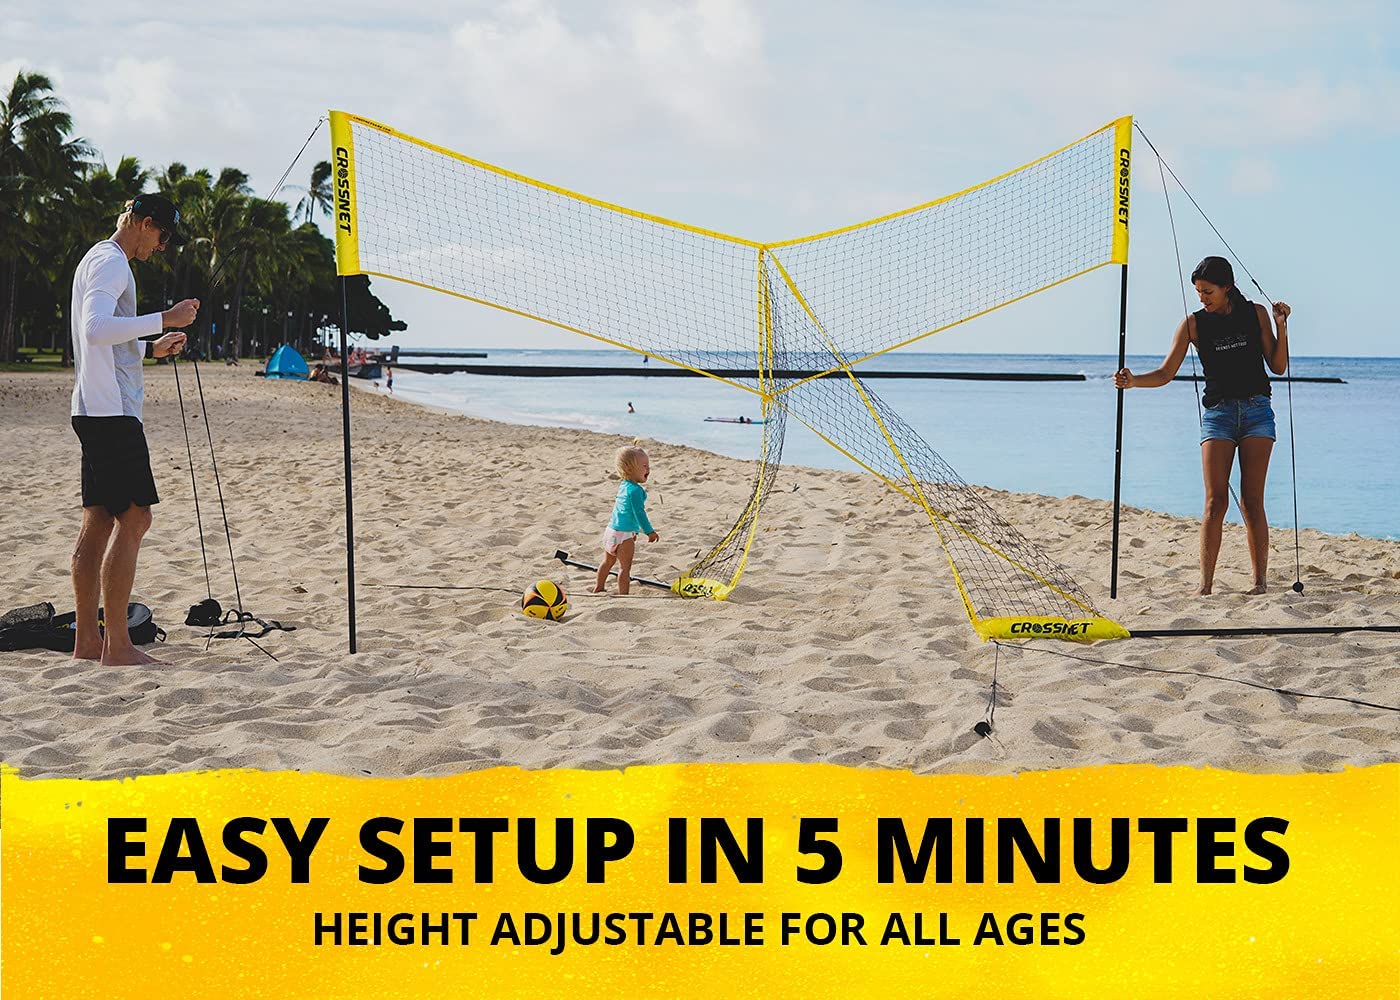 CROSSNET Four Square Volleyball Net & Game Set - Volleyball Set for Backyards - Yard Games for Kids and Adults Game Four Square Volleyball - Includes Poles, Carrying Backpack